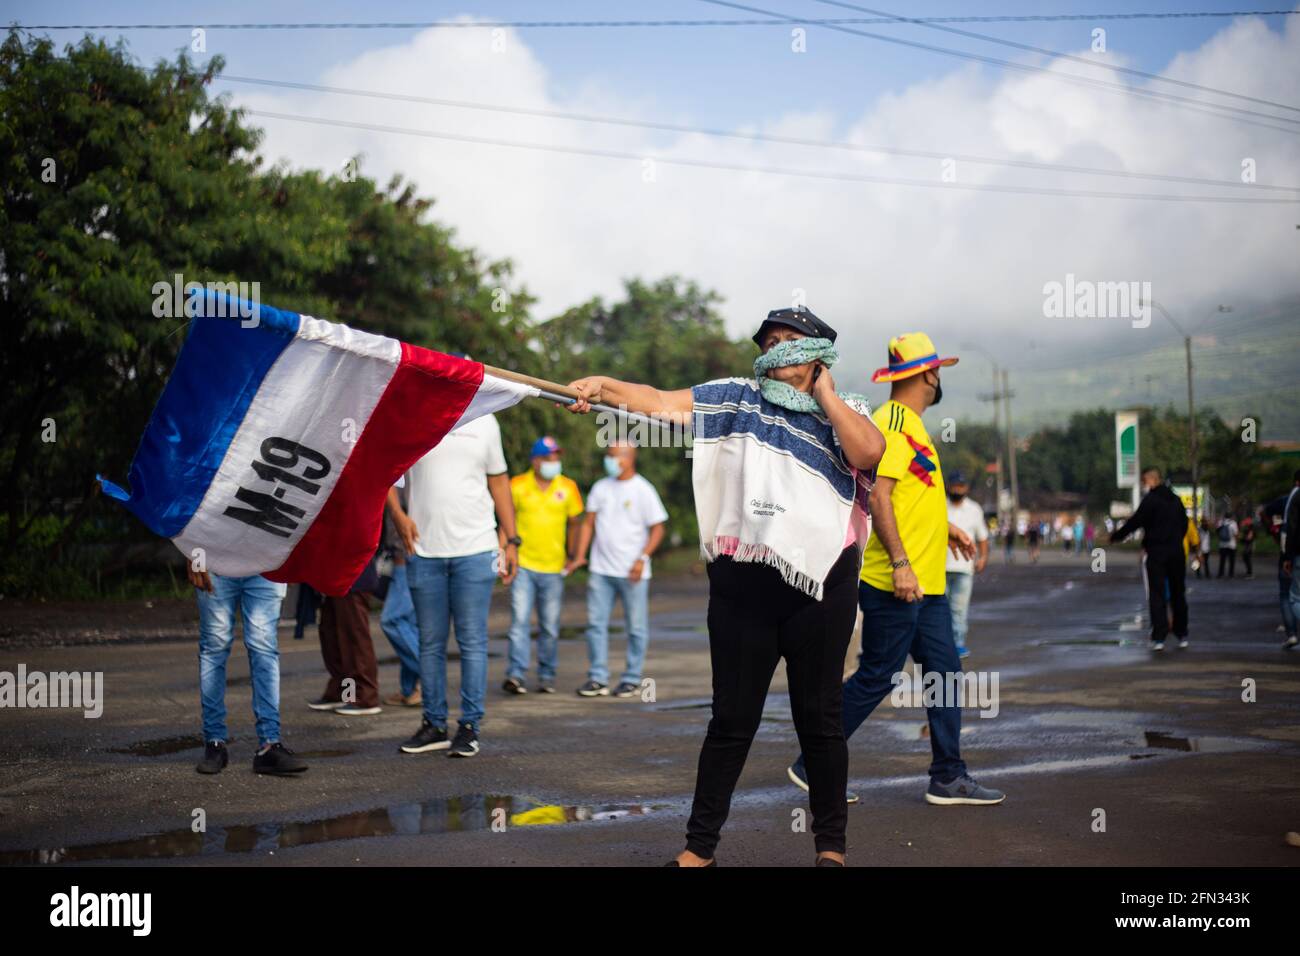 A demonstrator waves the flag of the non-existant guerrilla M-19 as demonstrators gather during the first day of anti-government protests against the tax reform and health reform of president Ivan Duque in Yumbo, Valle del Cauca on April 28, 2021. Later in the day demonstrations rised to riots and several deaths in police brutality cases in the department of Valle del Cauca. Stock Photo